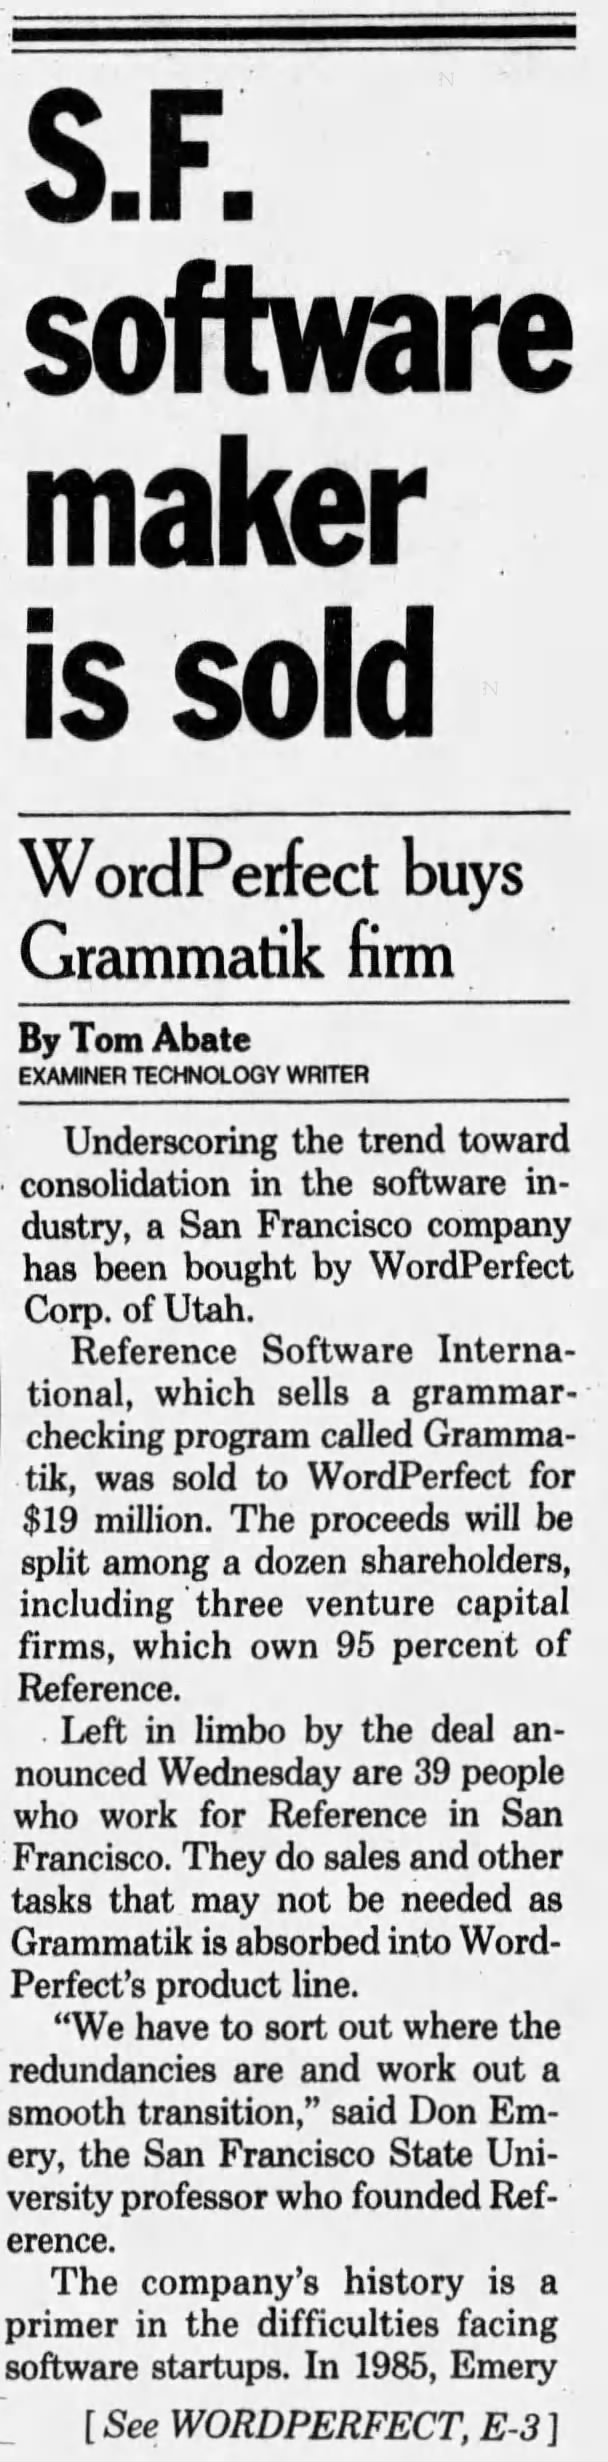 S.F. software maker is sold, page 1 of 2